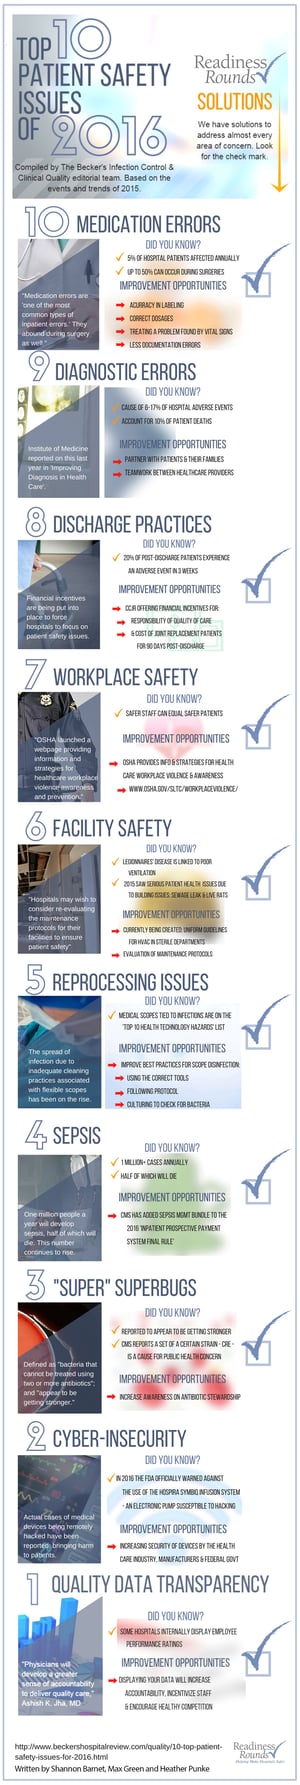 Top 10 patient safety issues infographic